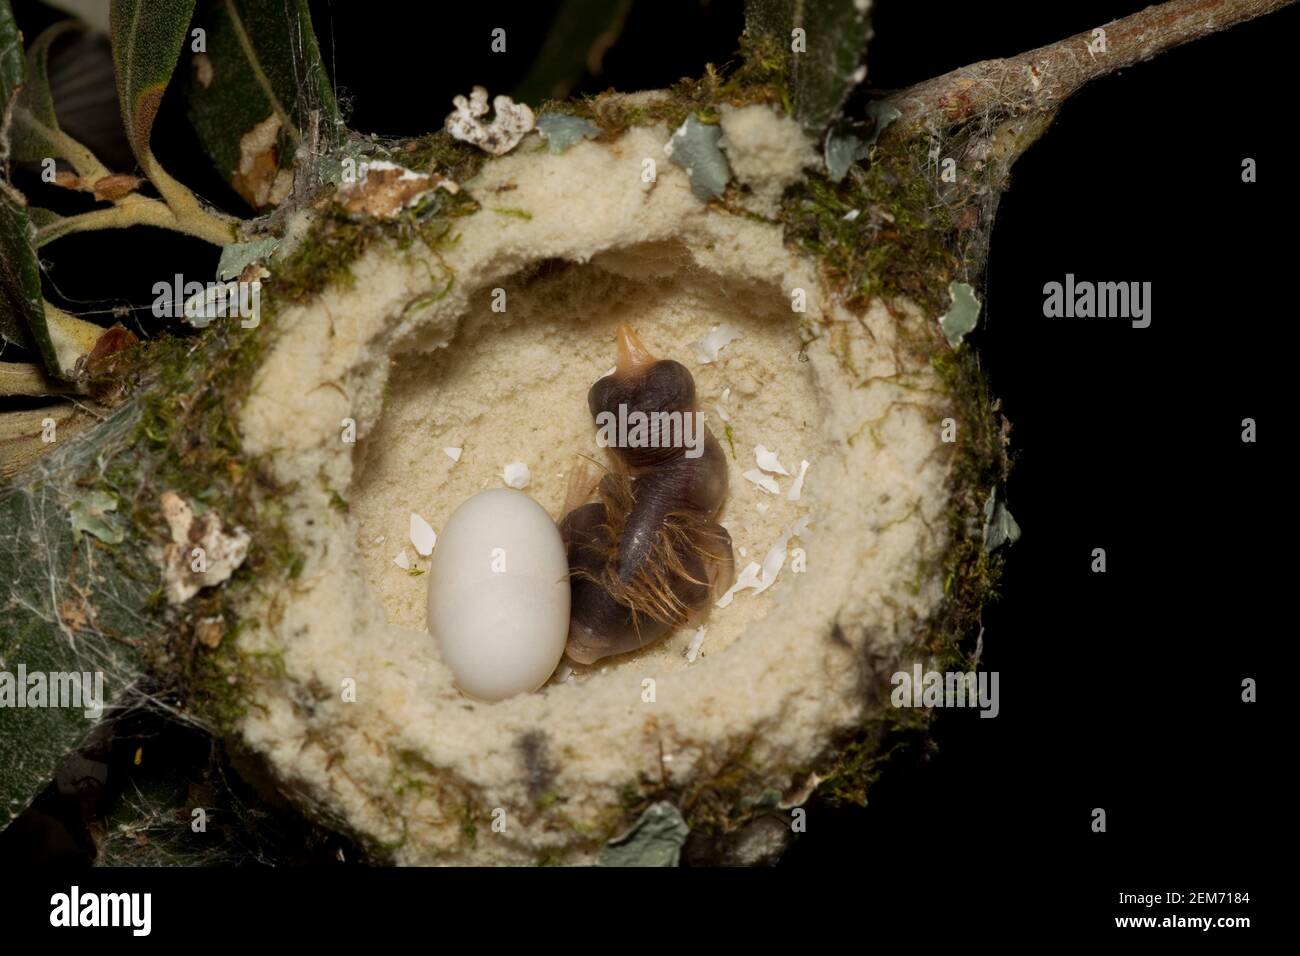 White-eared Hummingbird nest with one egg and one recently hatched nestling, Hylocharis leucotis. First day out of the egg. Stock Photo